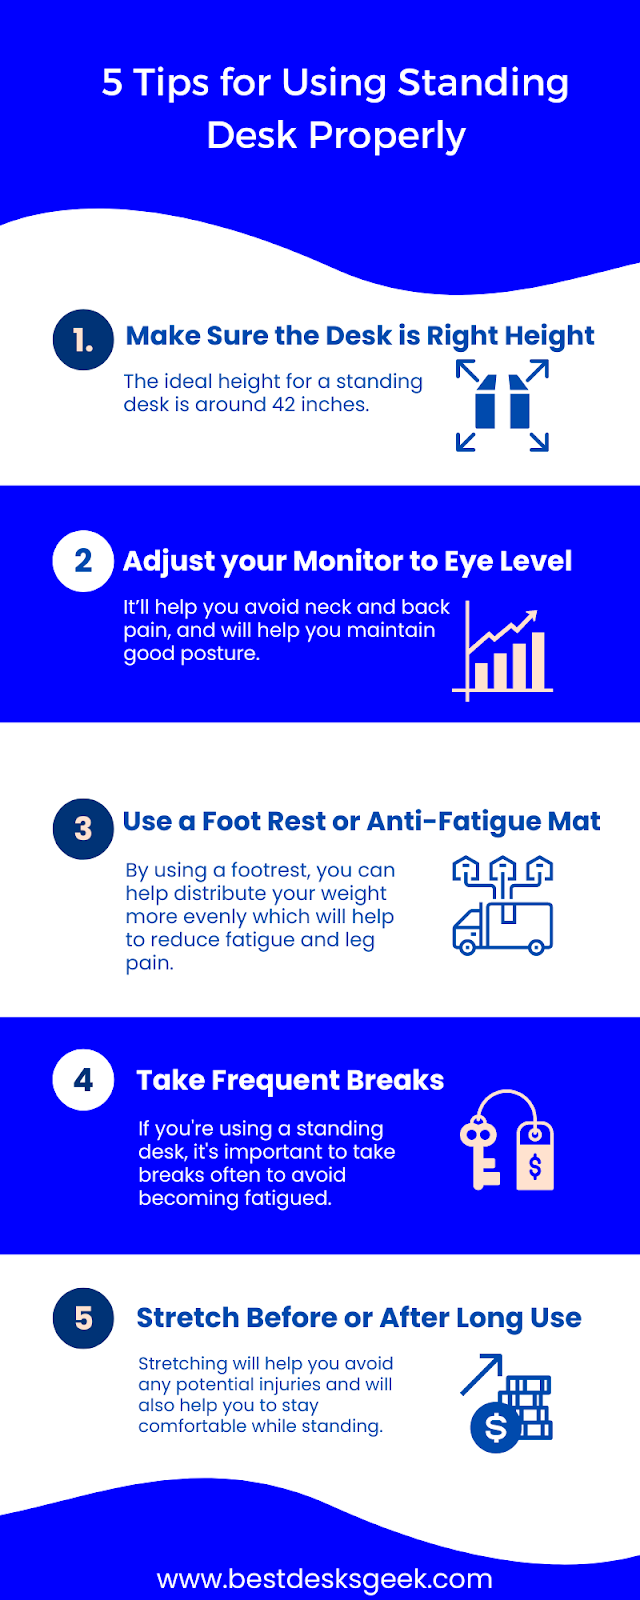 An infographic showing the tips for using standing desk properly